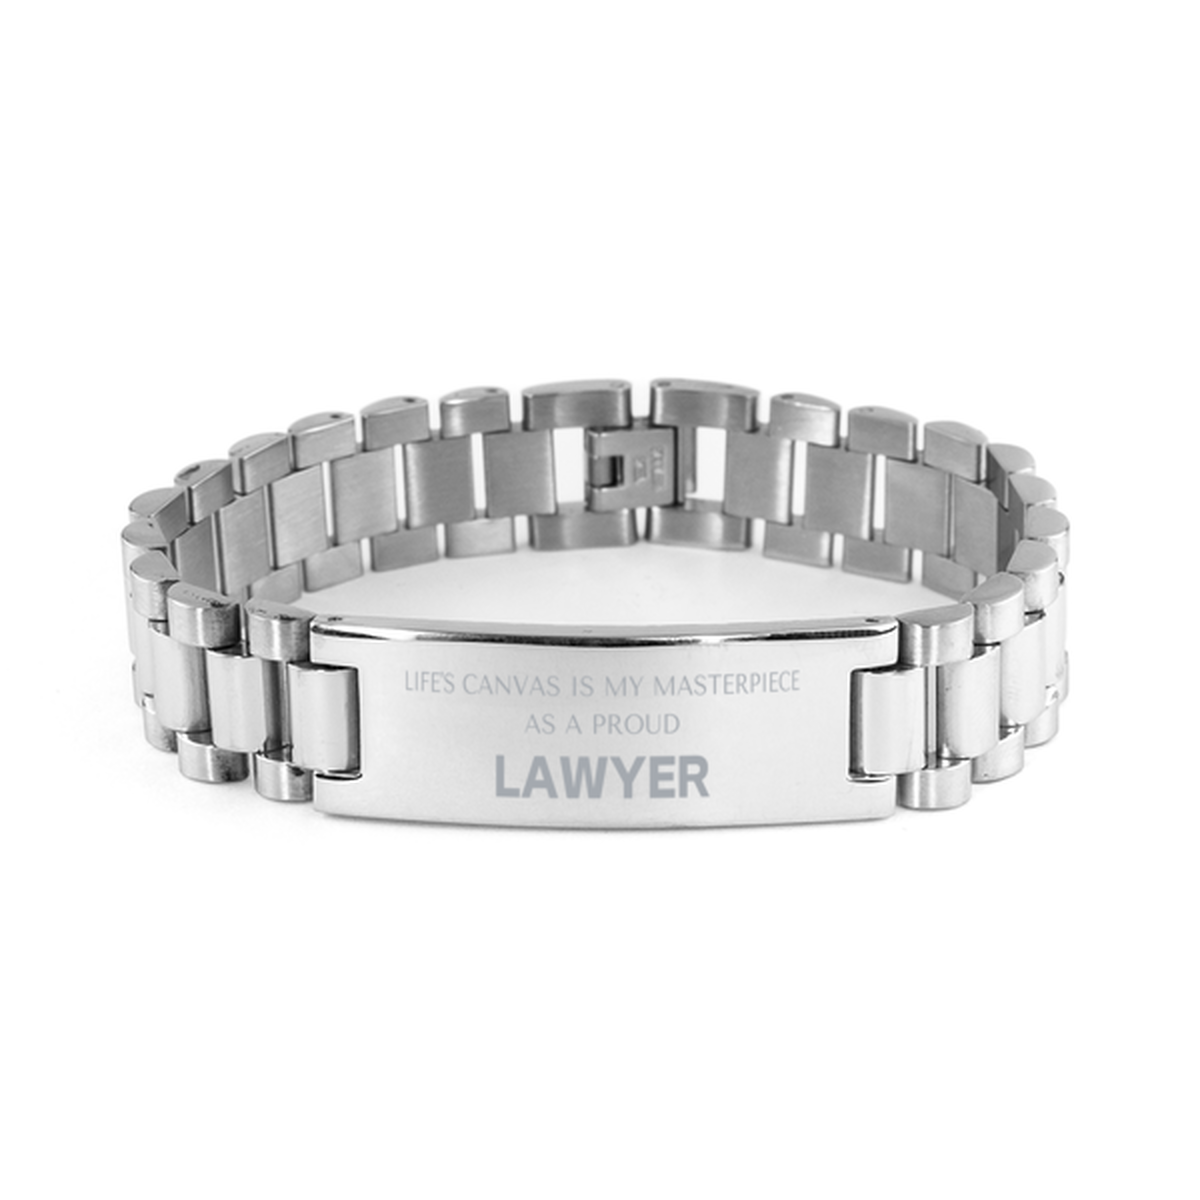 Proud Lawyer Gifts, Life's canvas is my masterpiece, Epic Birthday Christmas Unique Ladder Stainless Steel Bracelet For Lawyer, Coworkers, Men, Women, Friends